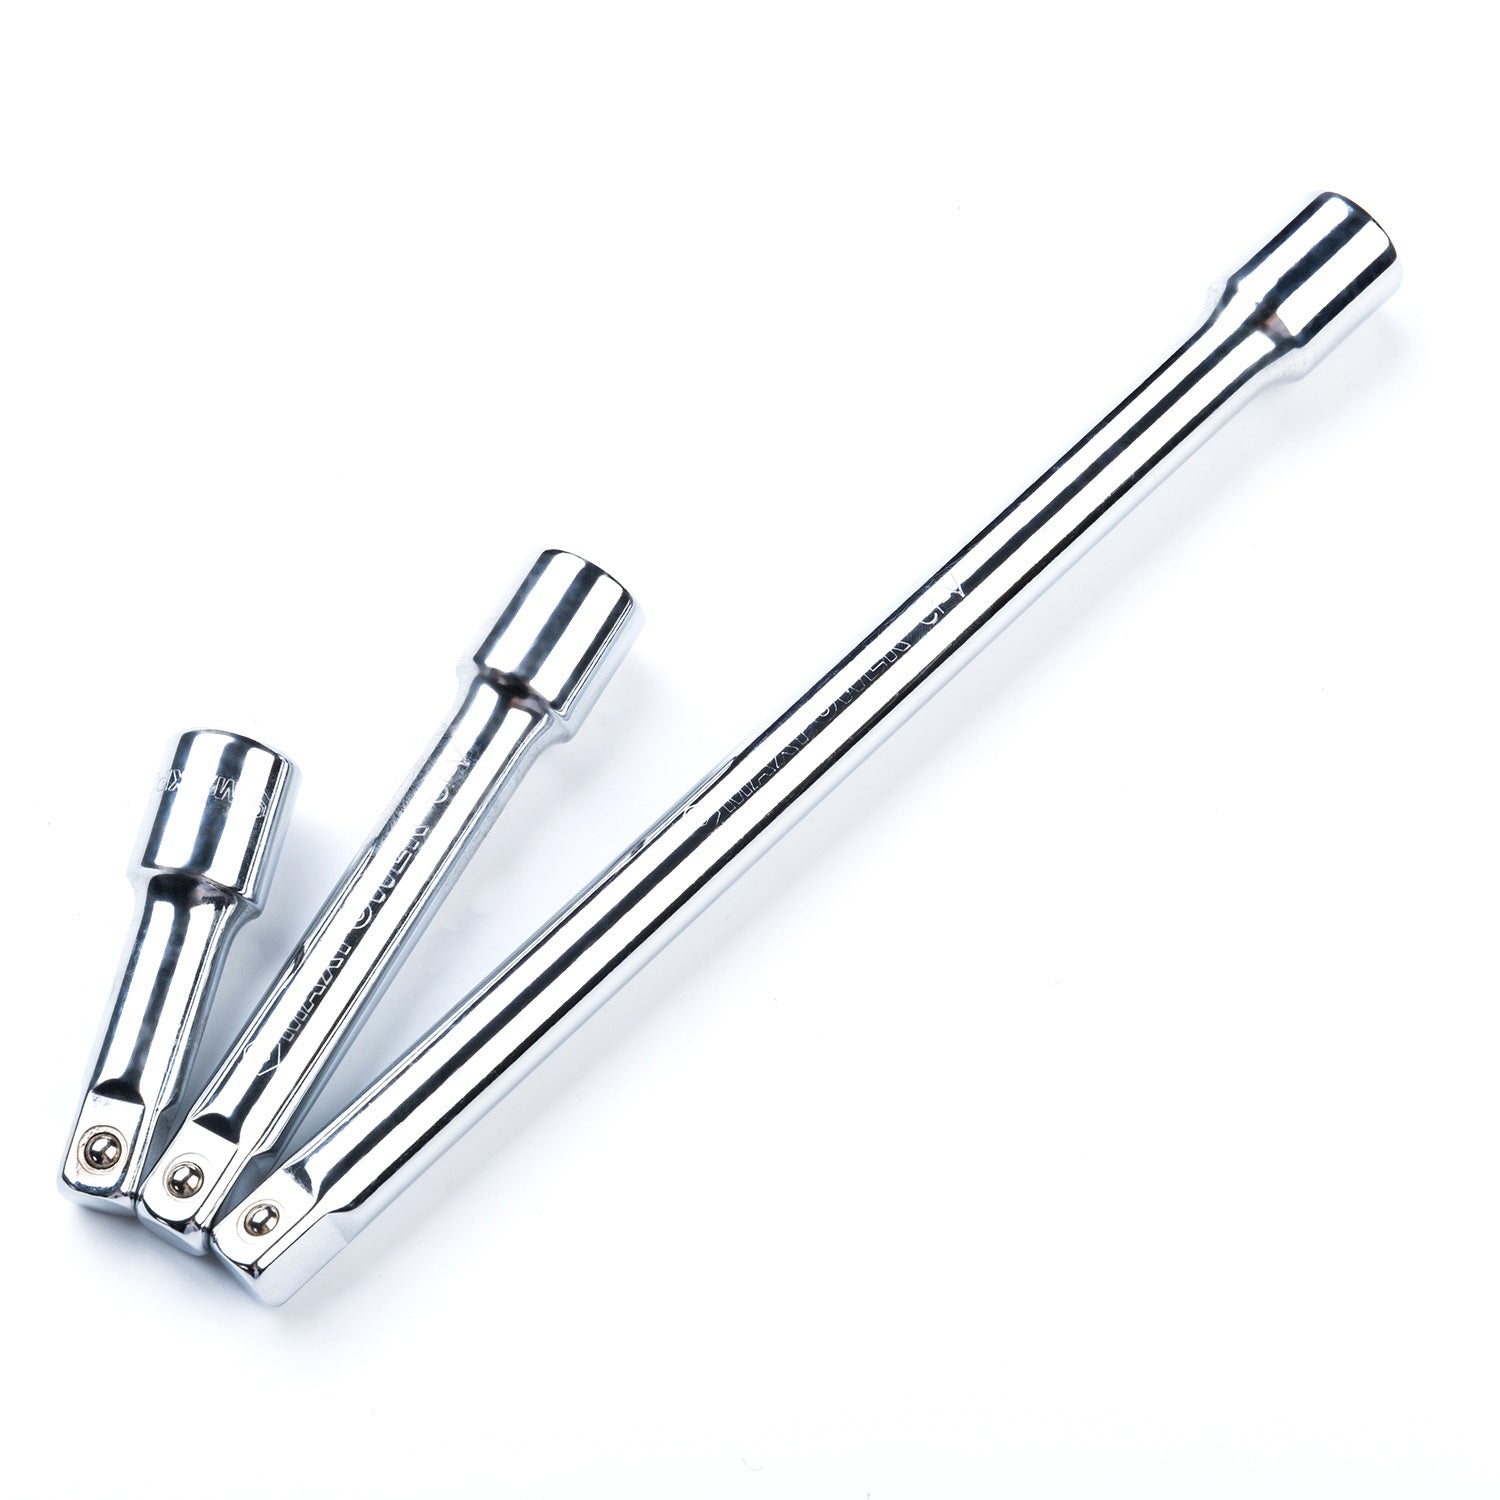 MAXPOWER 1/2 Inch Drive Extension Bar Set (3in, 5in, 10in), 3PCS